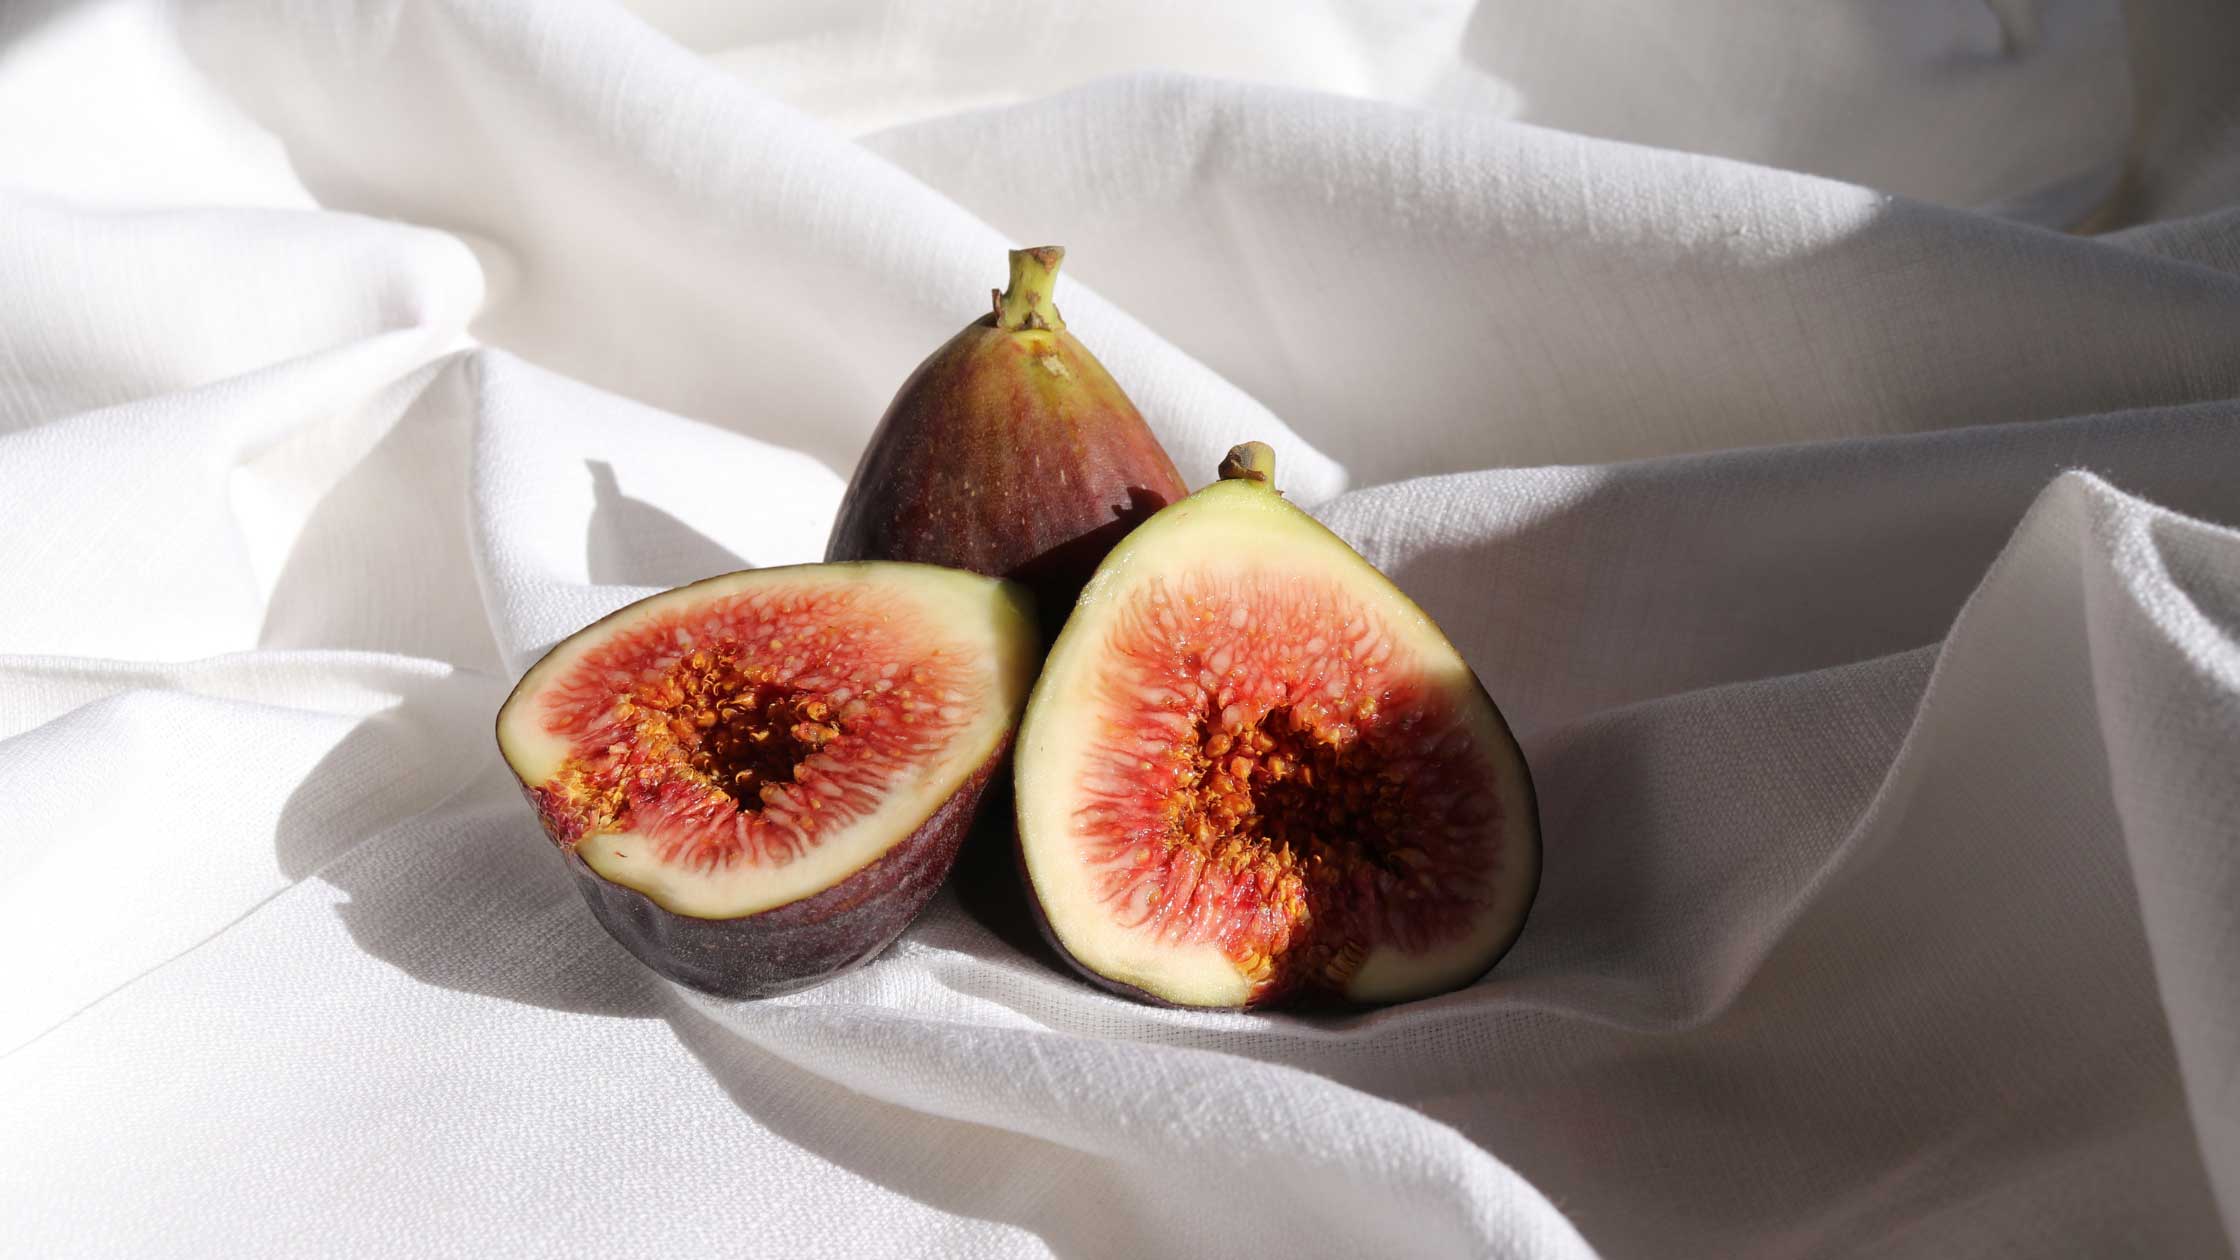 All natural figs in a white sheet.  Figs can increase sex drive. Rich in antioxidants.